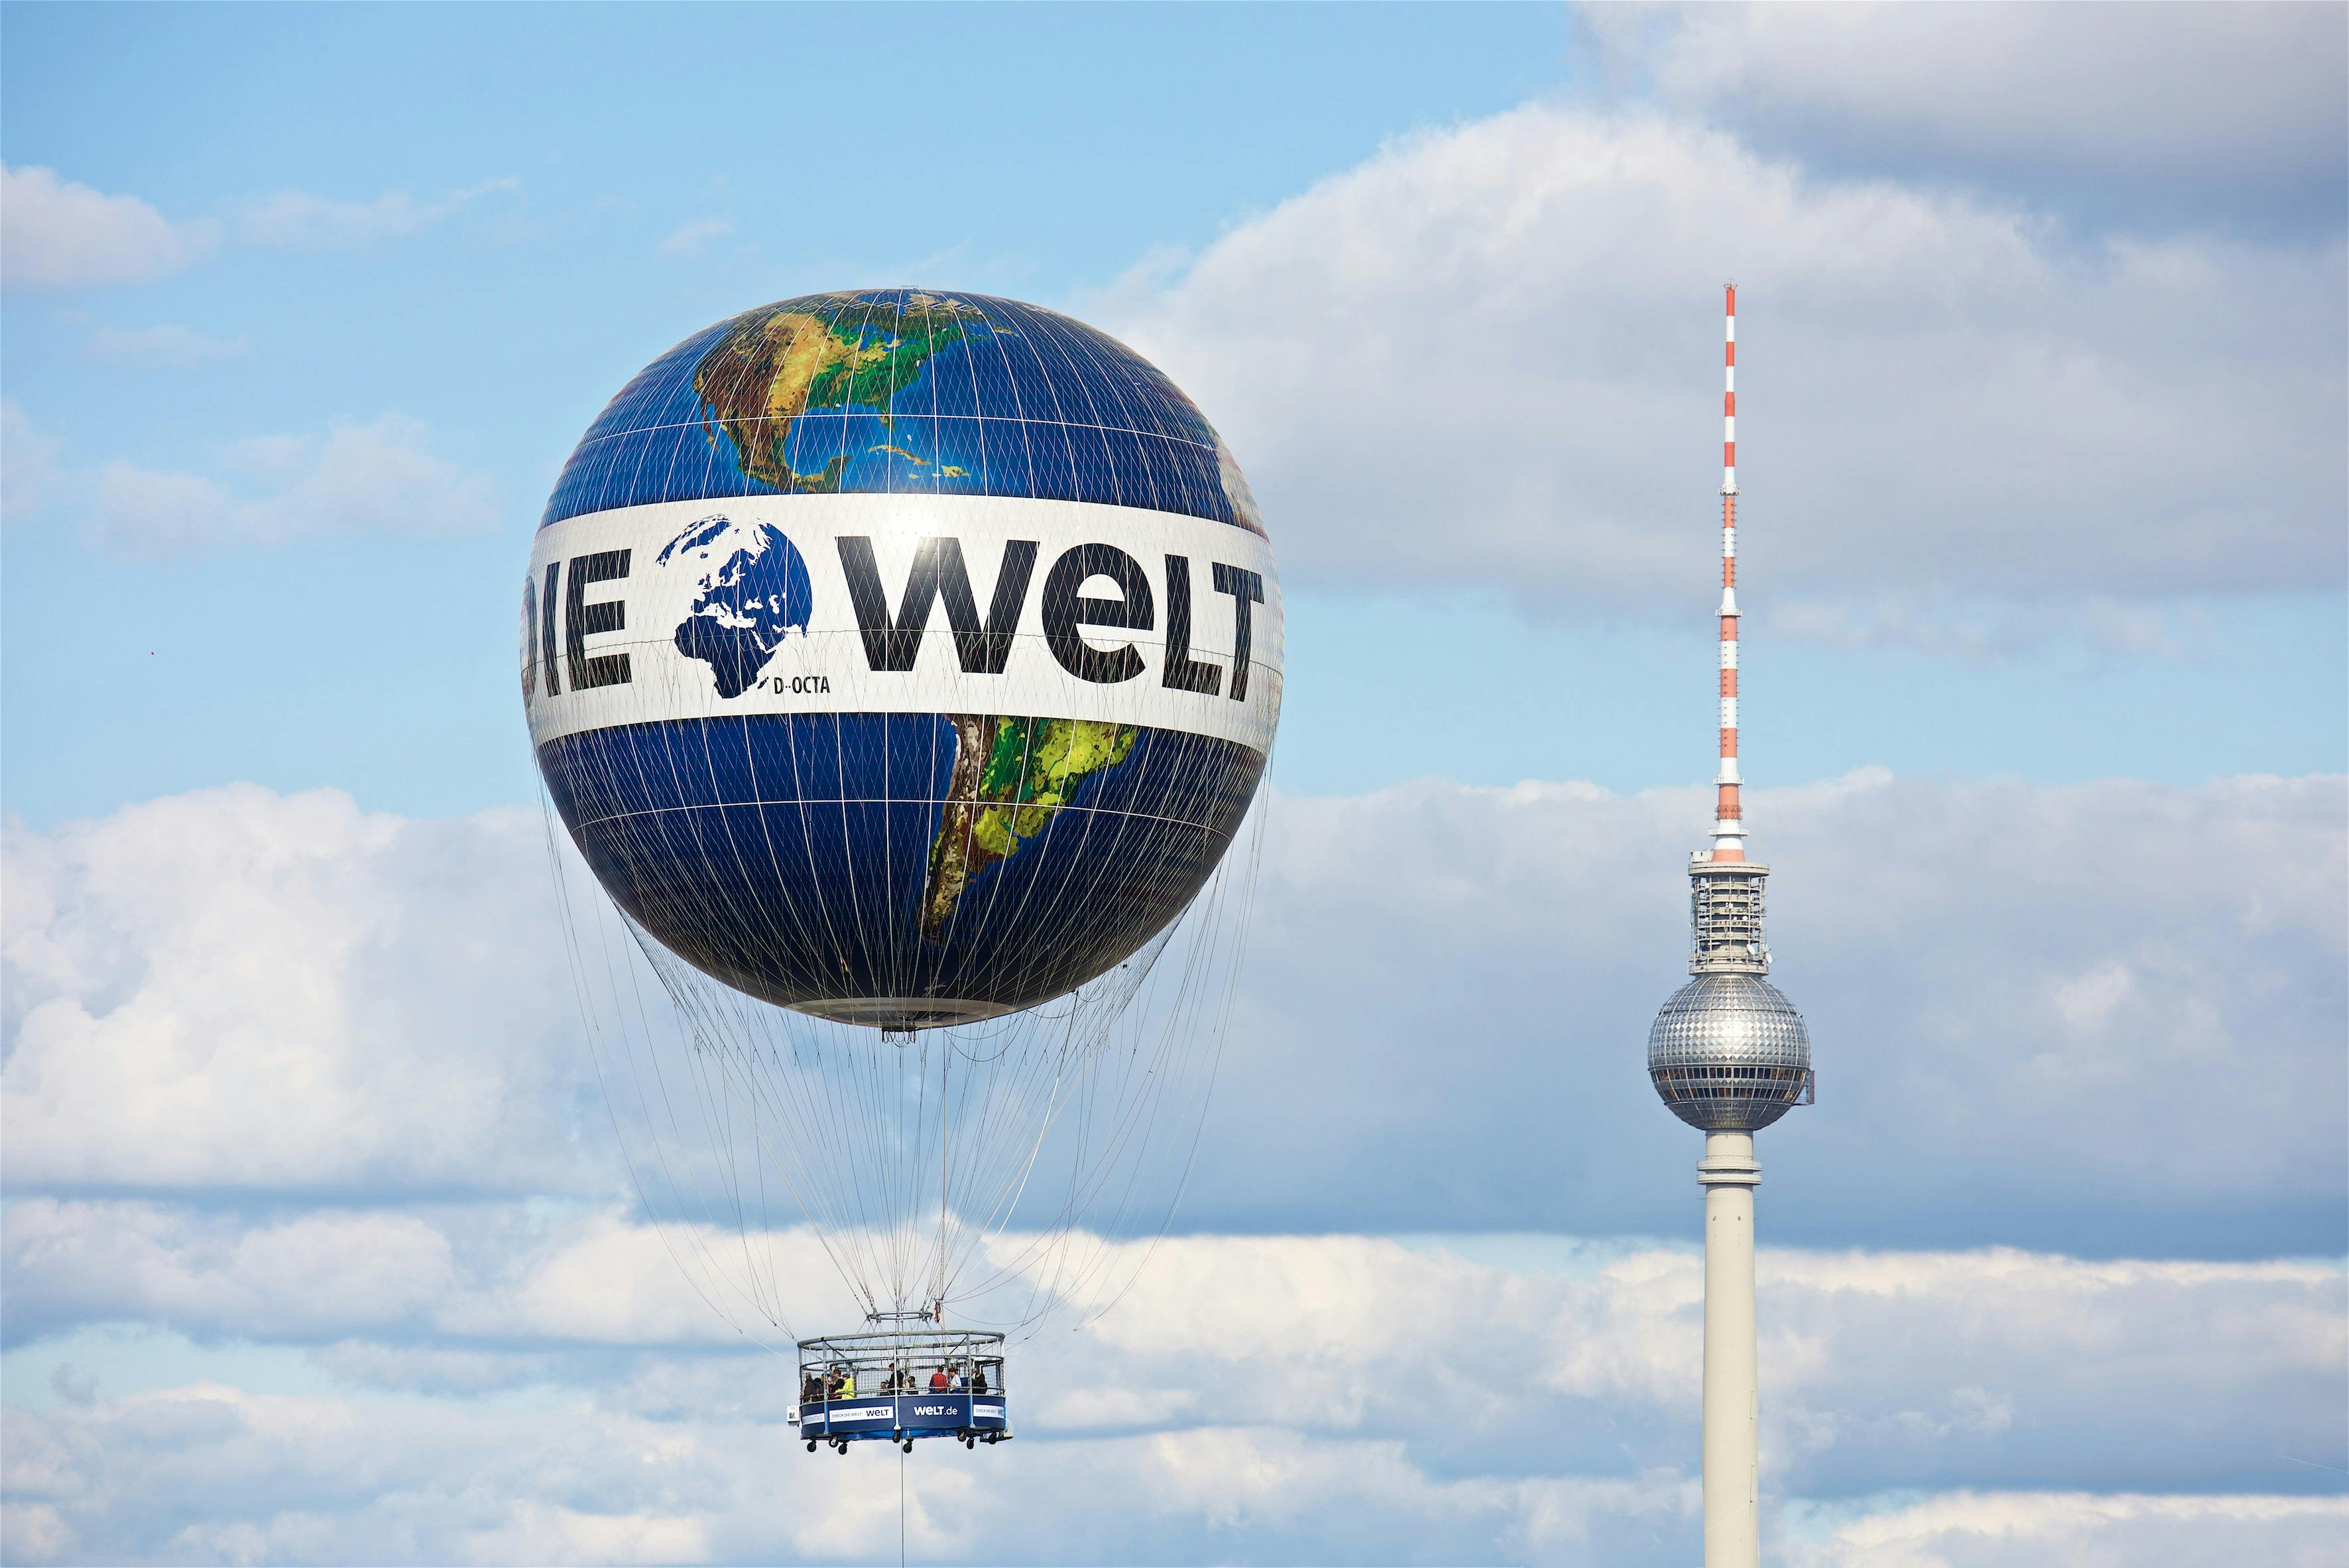 Ascent with the WELT Ballon at Checkpoint Charlie